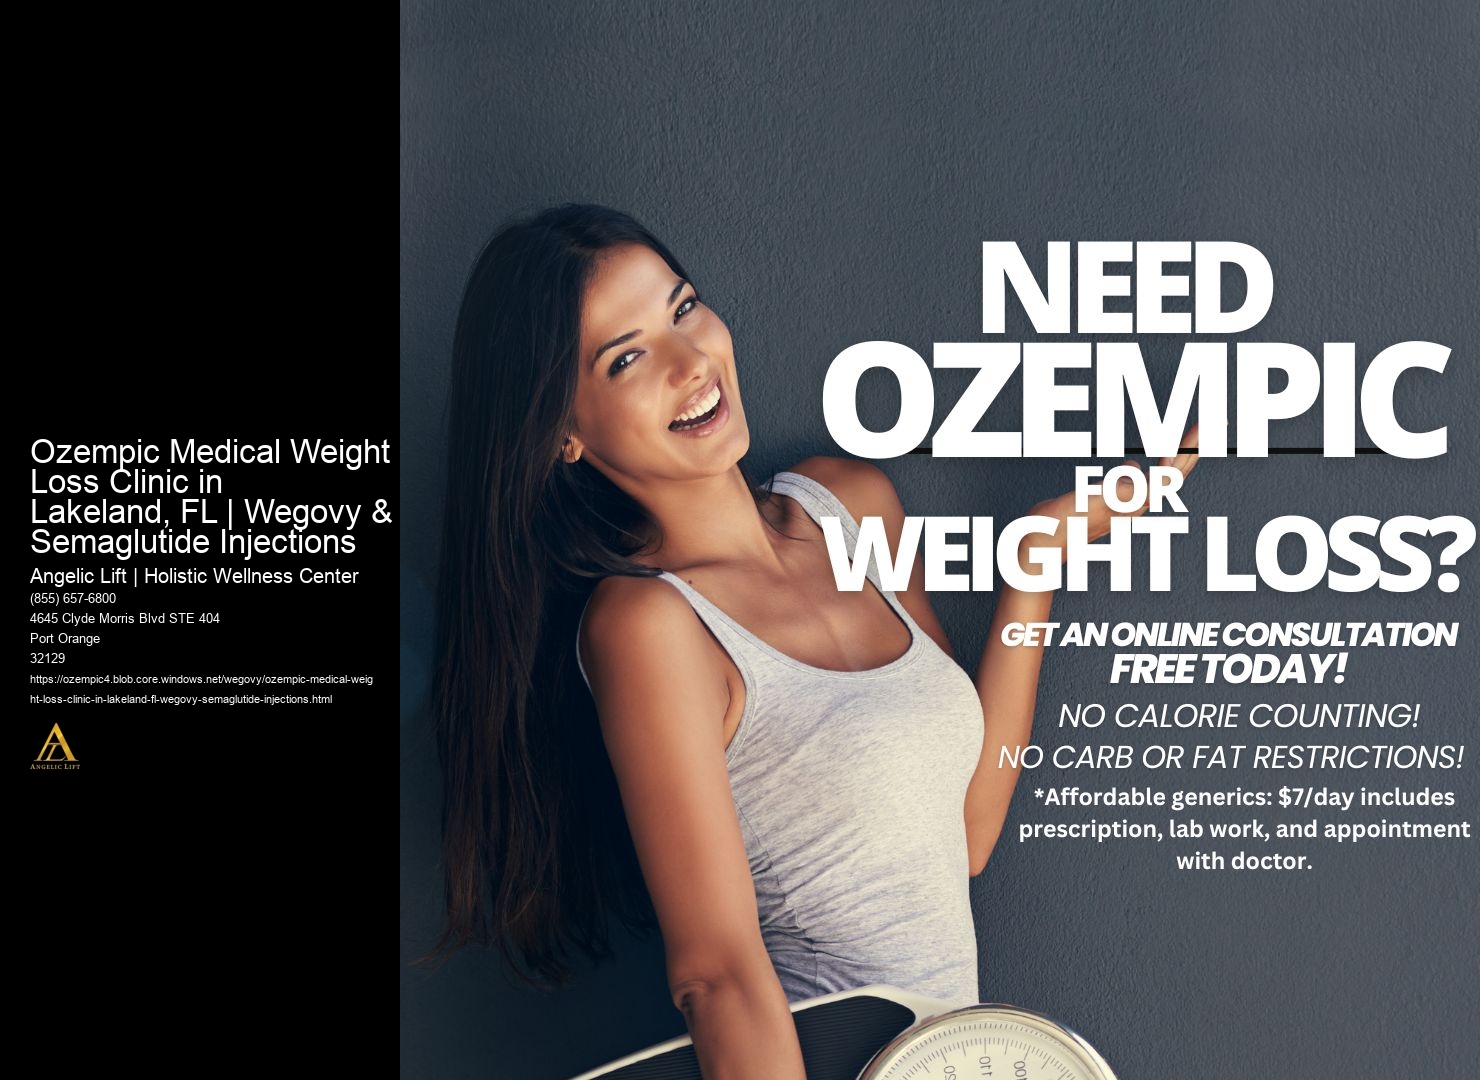 Ozempic Medical Weight Loss Clinic in Lakeland, FL | Wegovy & Semaglutide Injections